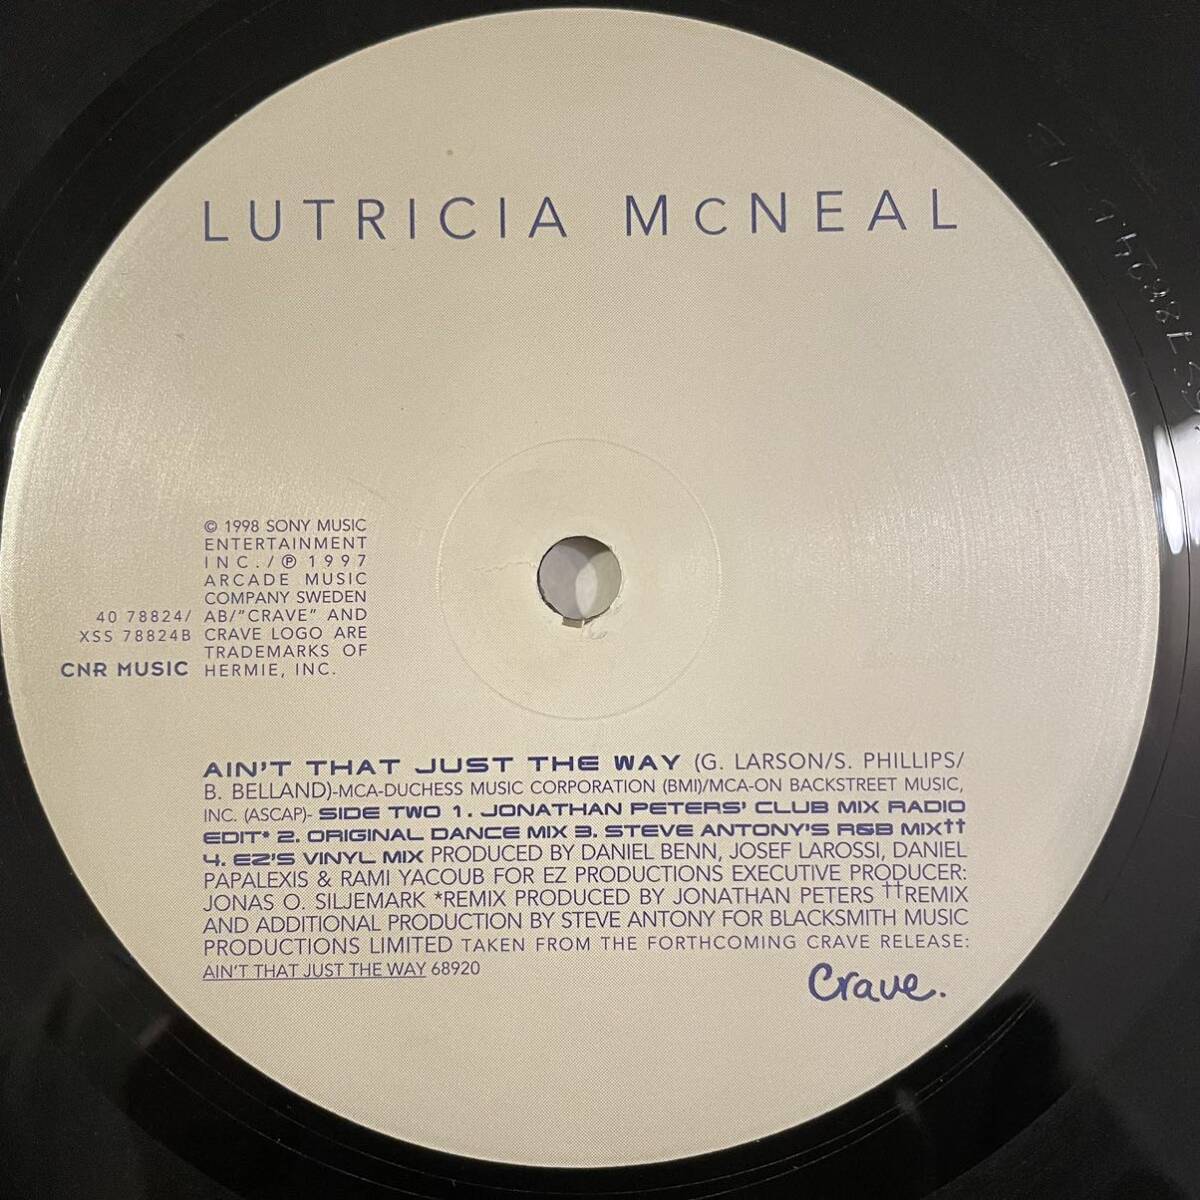 【12inchレコード】Lutricia McNeal 「Ain't That Just The Way」Crave 40 78824, CNR Music 40 78824_画像4